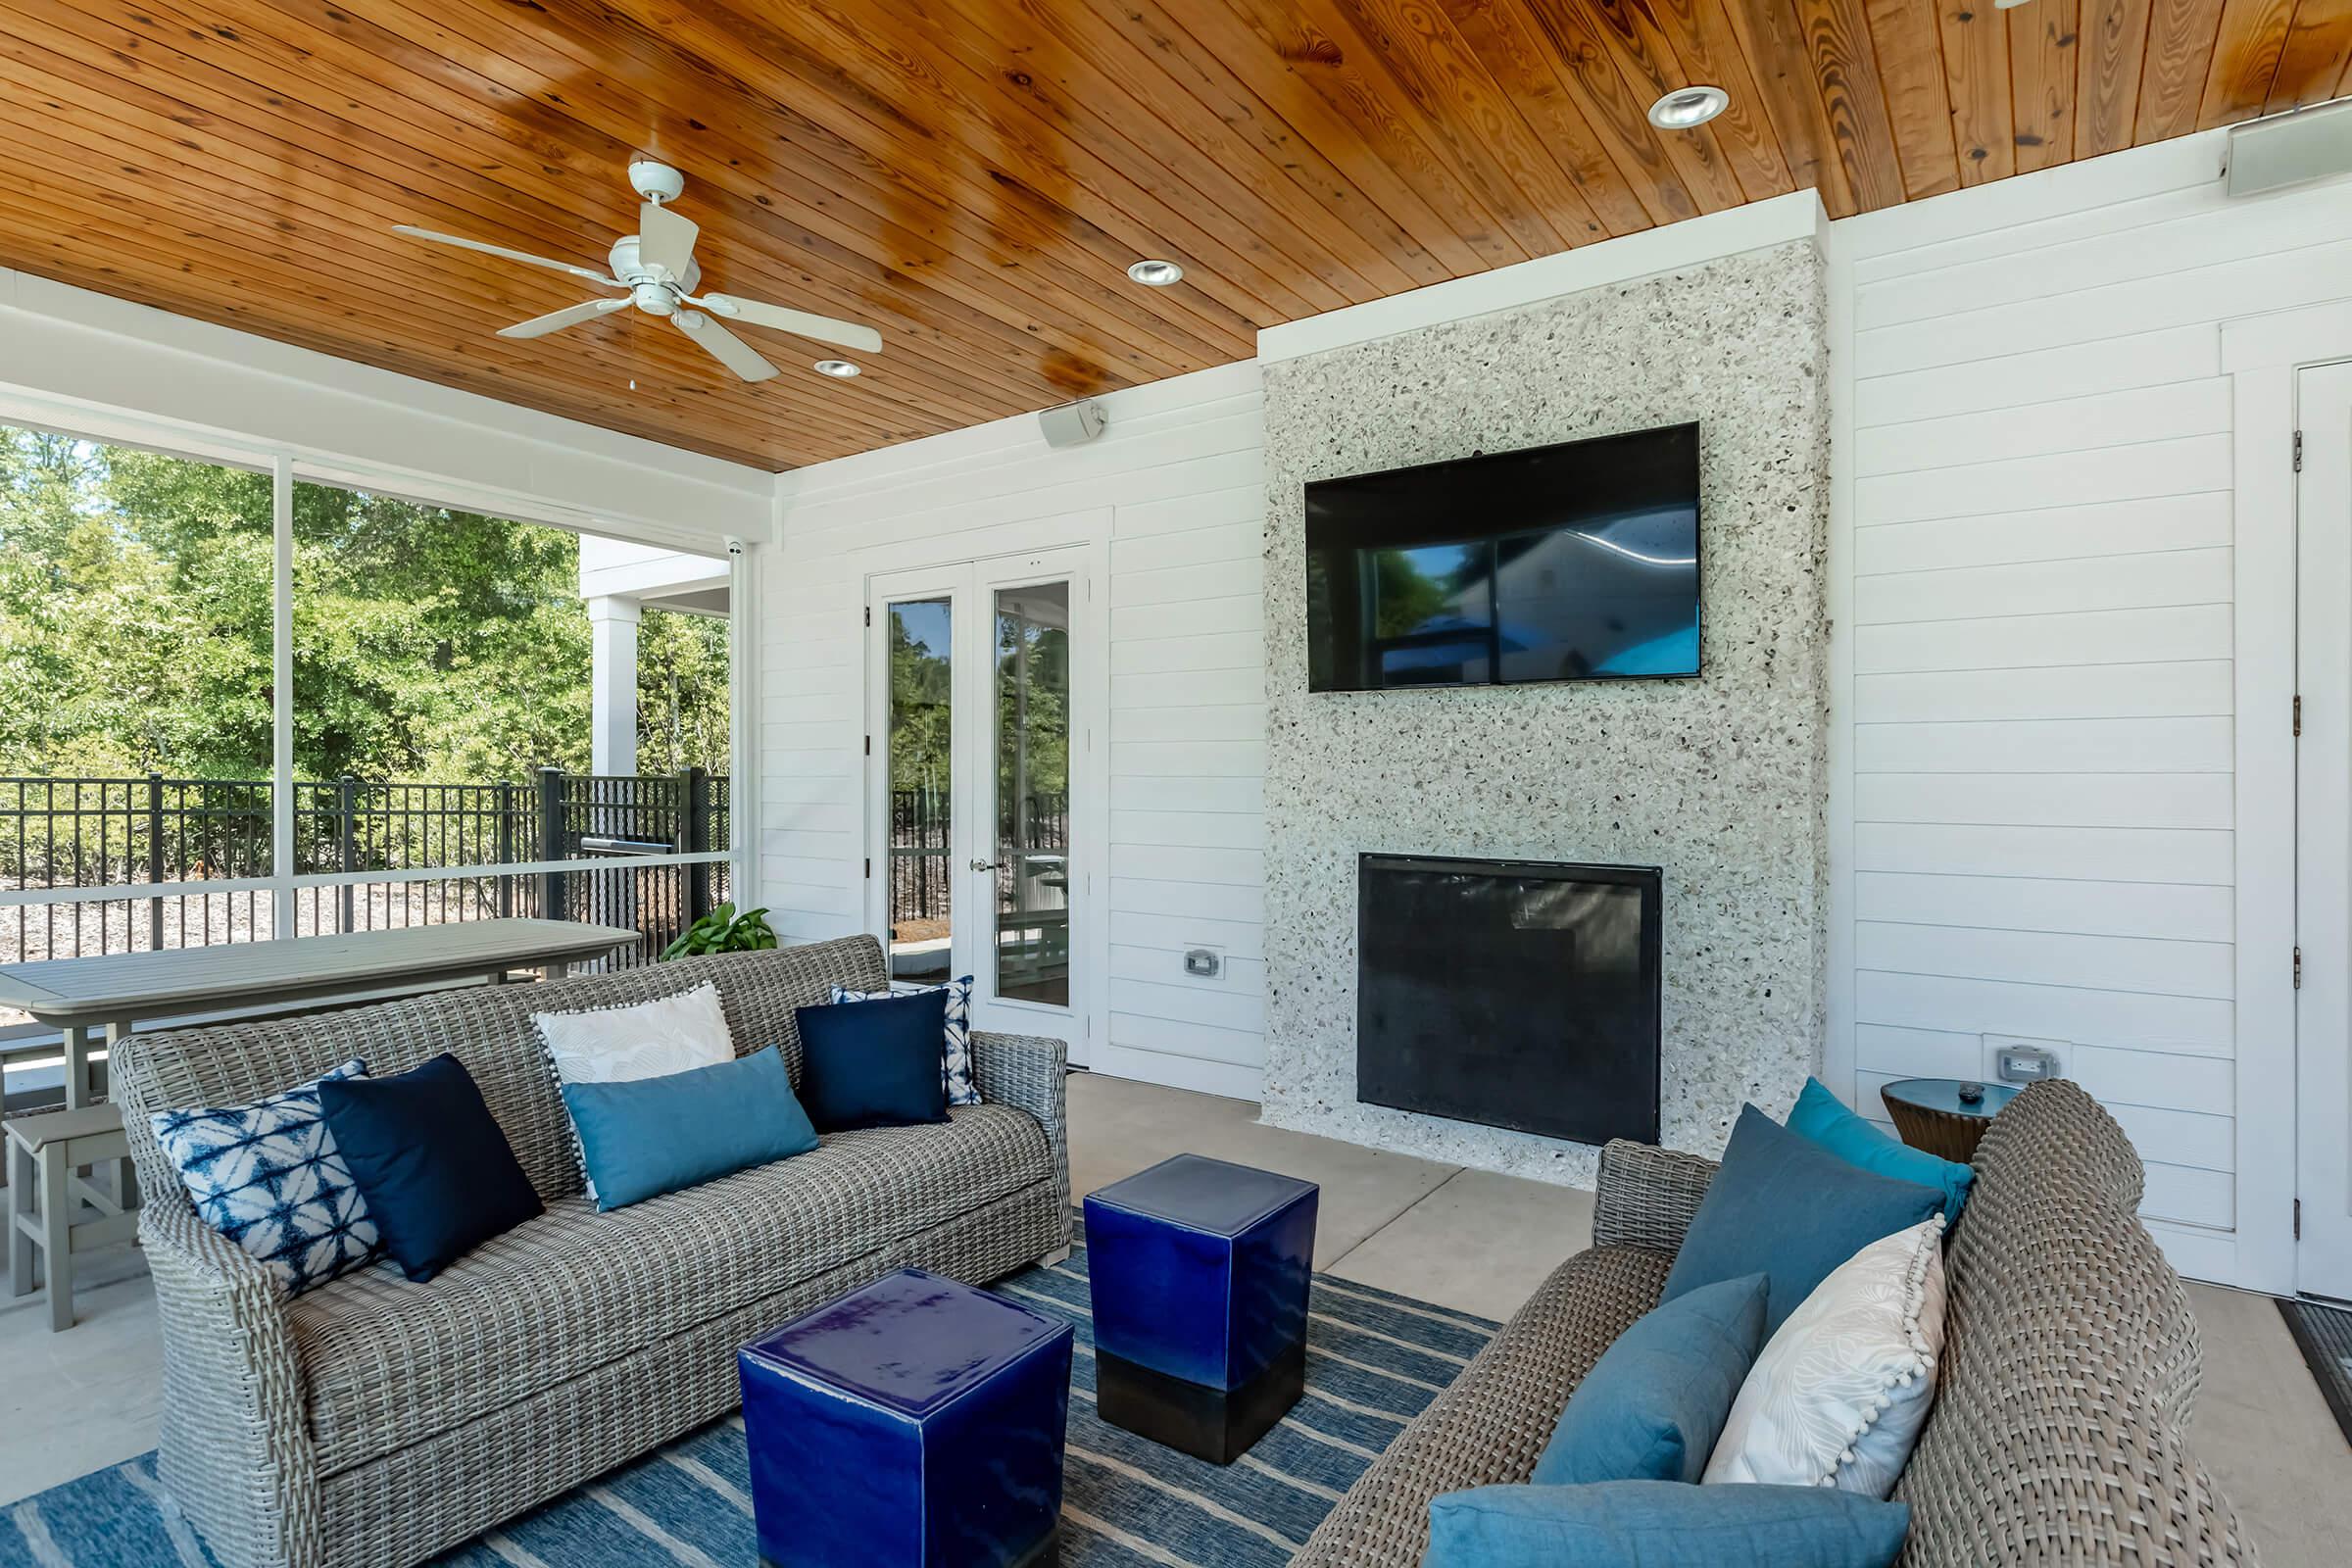 RELAX IN THE CLUBHOUSE WITH SCREENED PORCH AND FIREPLACE